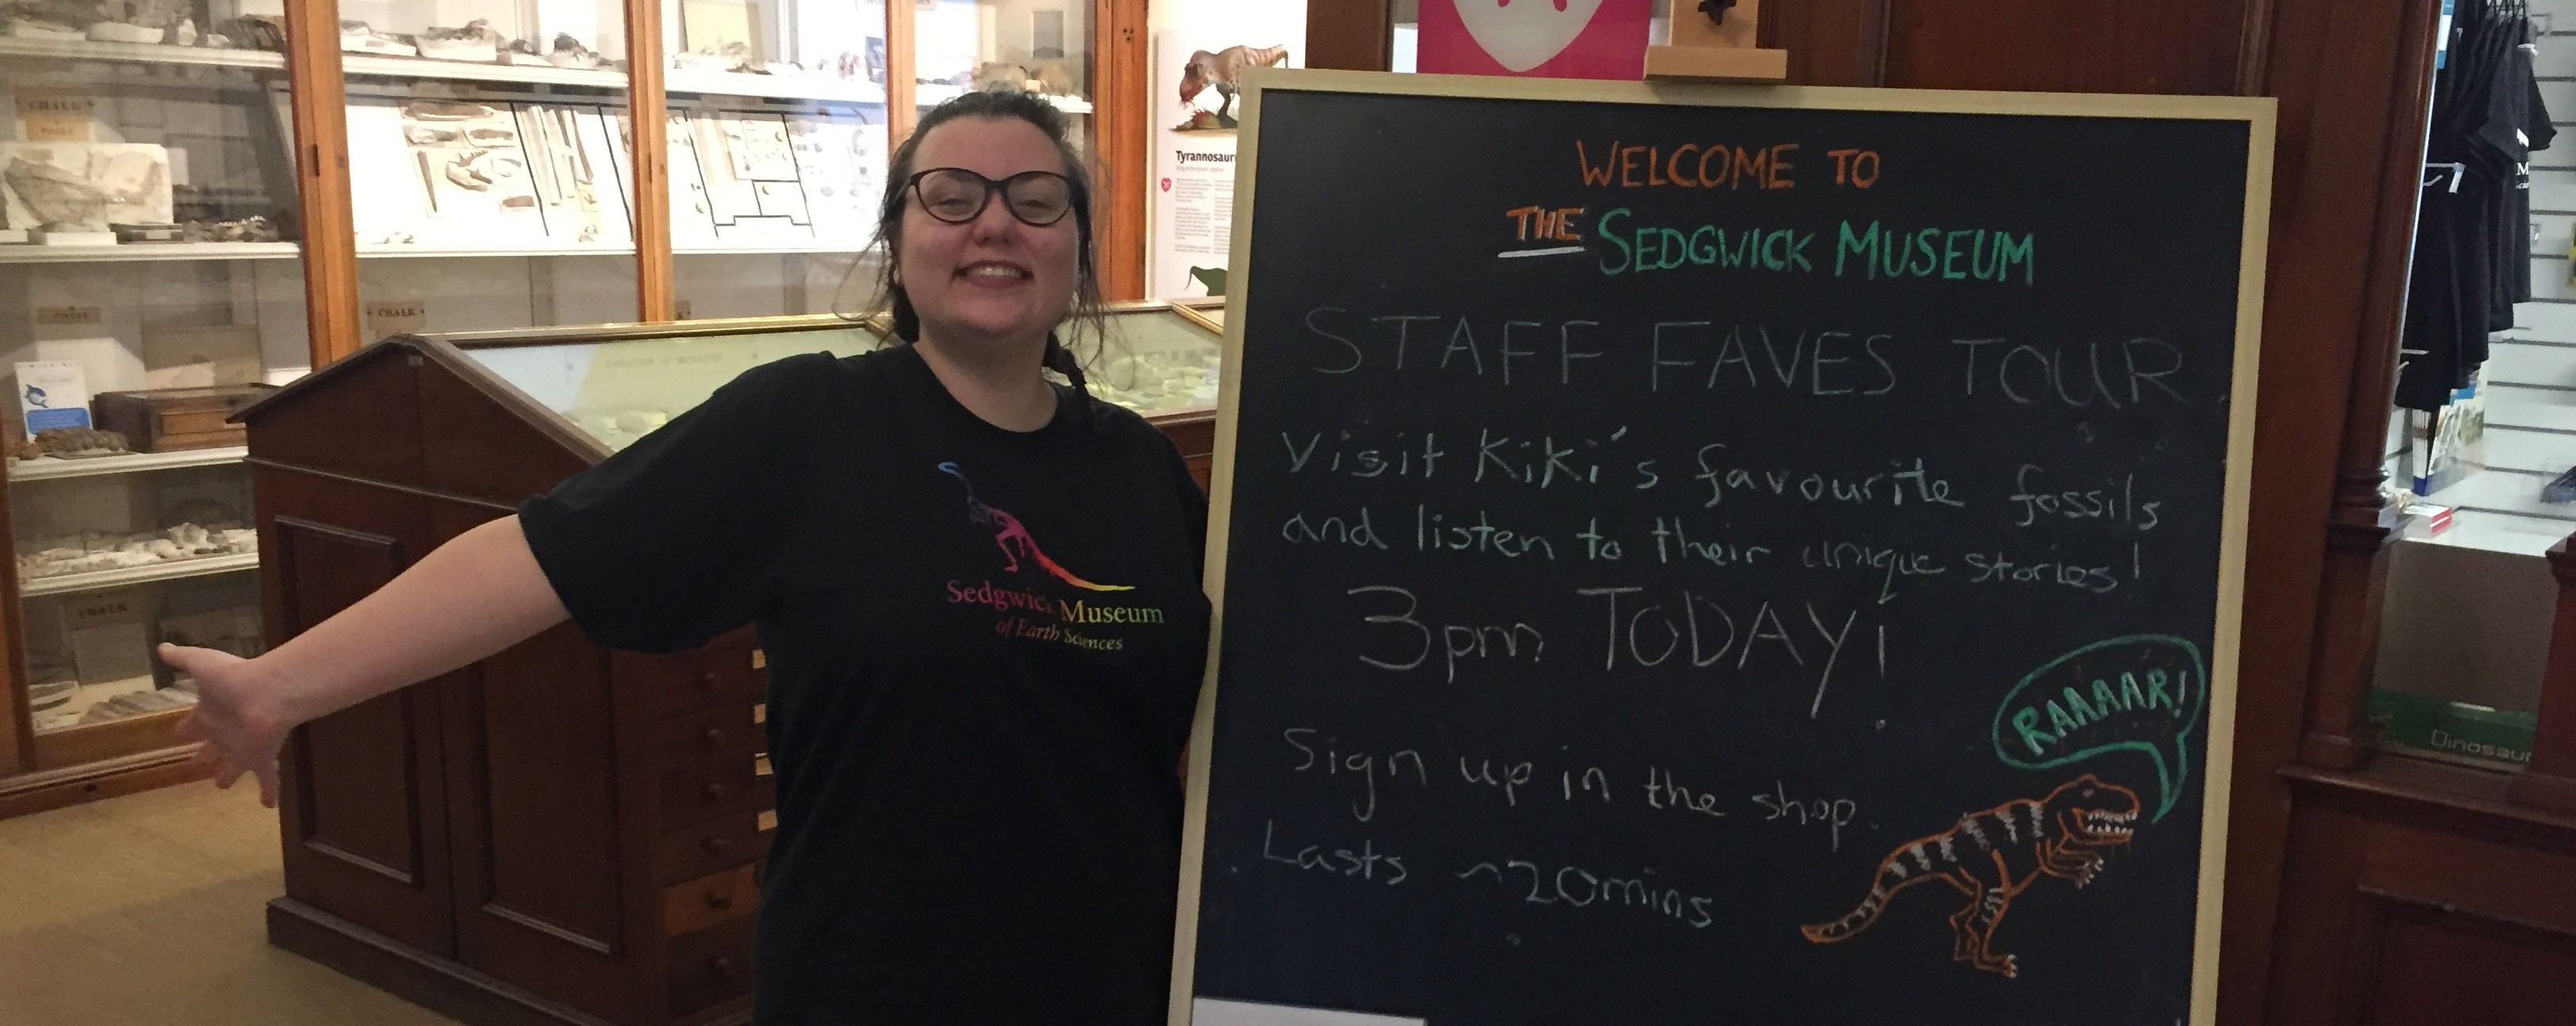 A member of museum staff enthusiastically smiling next to a chalk board sign advertising her tour.